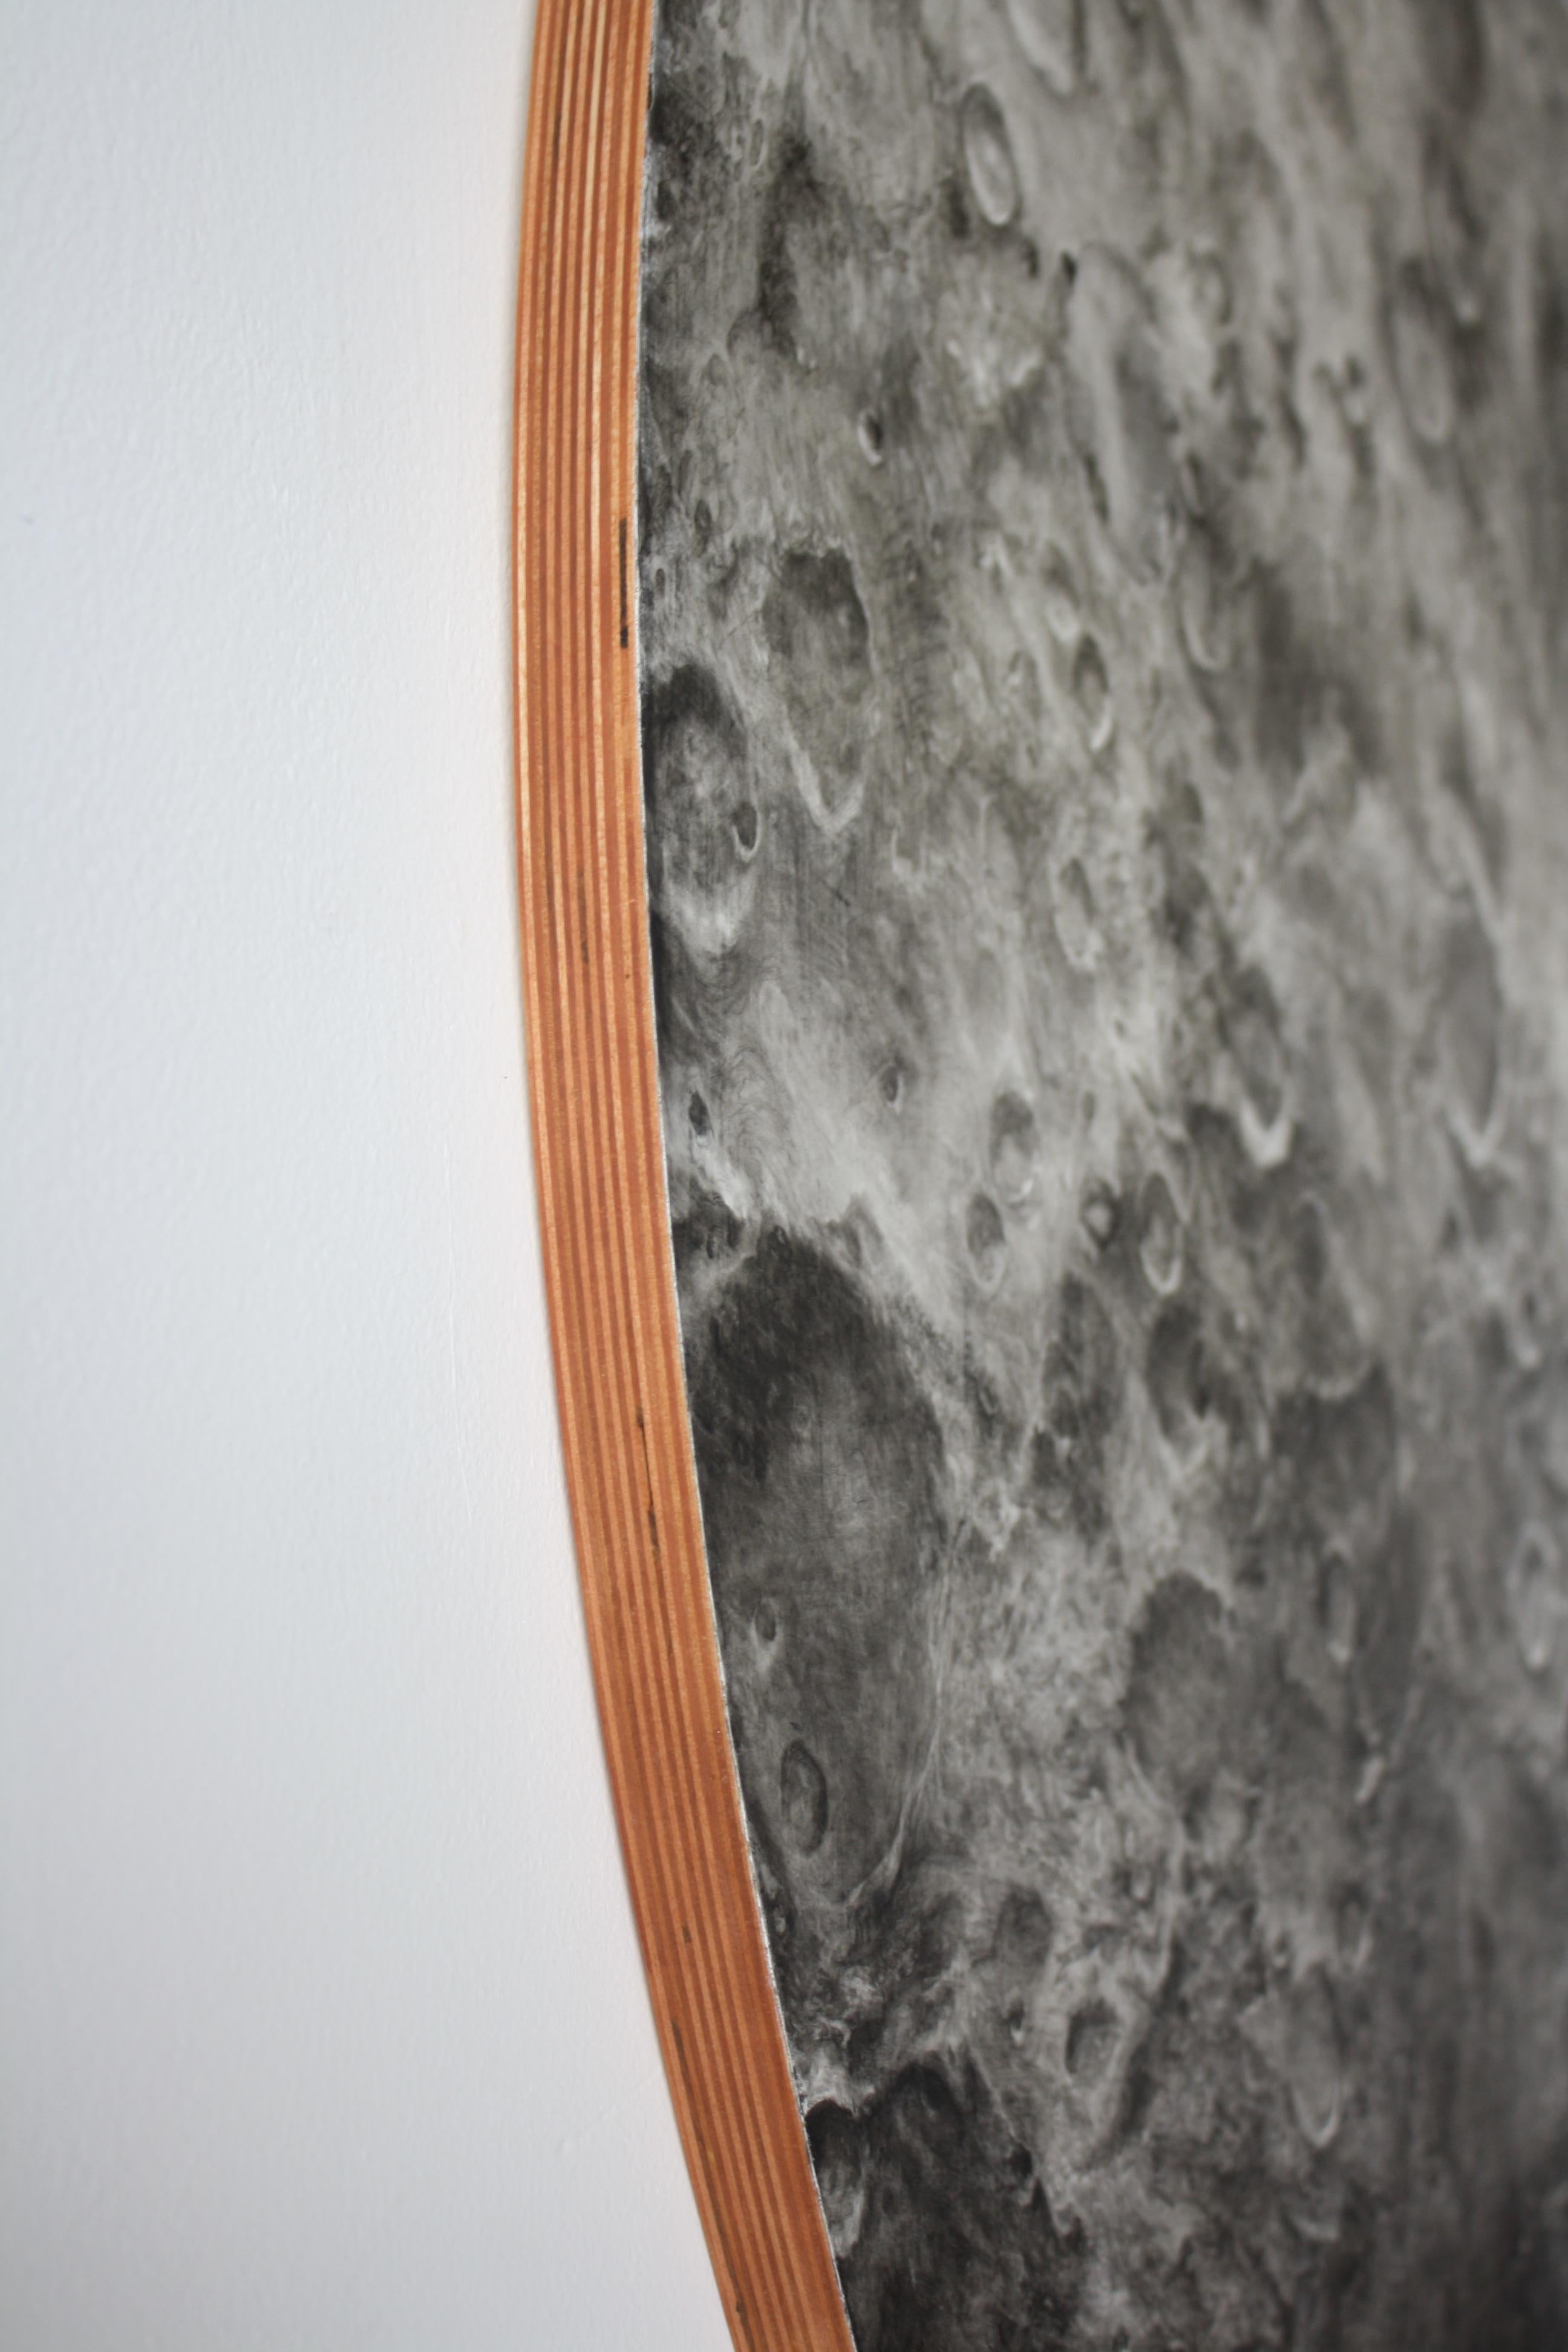 Bethany Carlson's photo-realistic charcoal drawing on a round panel. The image is of a moon or a planet in space.  More information below:

While thinking about the nature of a moon, I created works that reflect the gentle tug our moon has on our